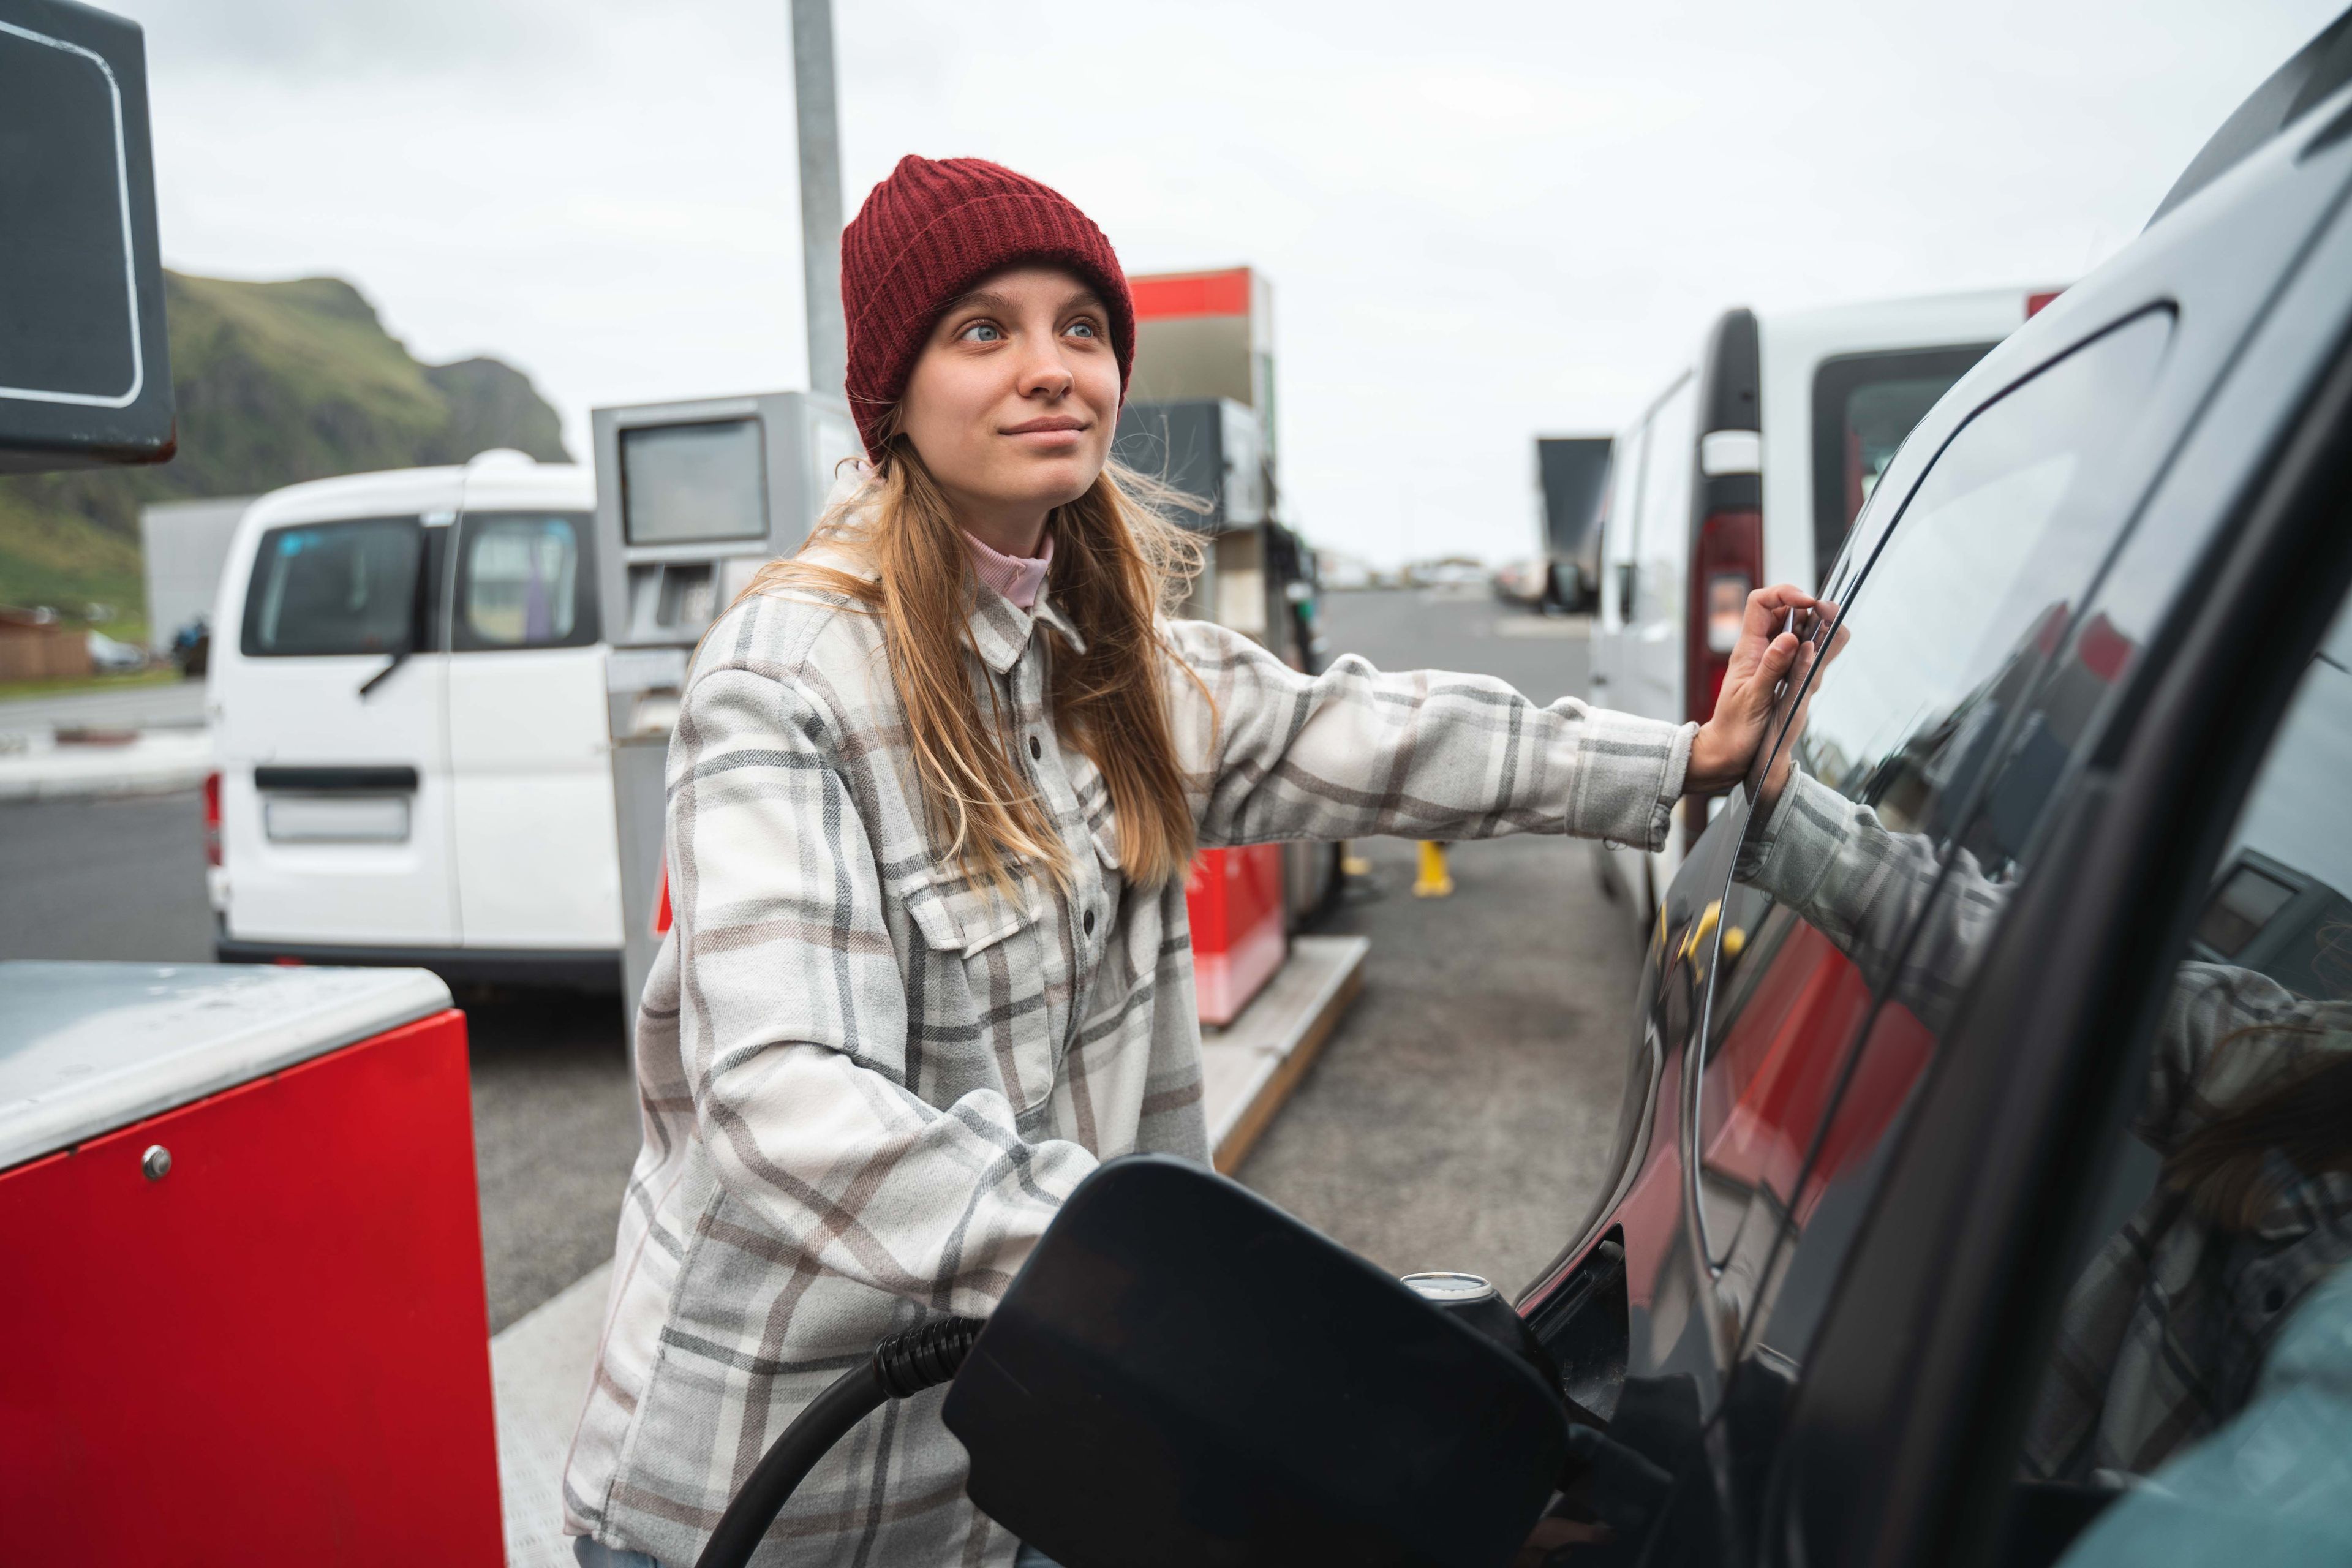 A woman filling up her rental car in iceland